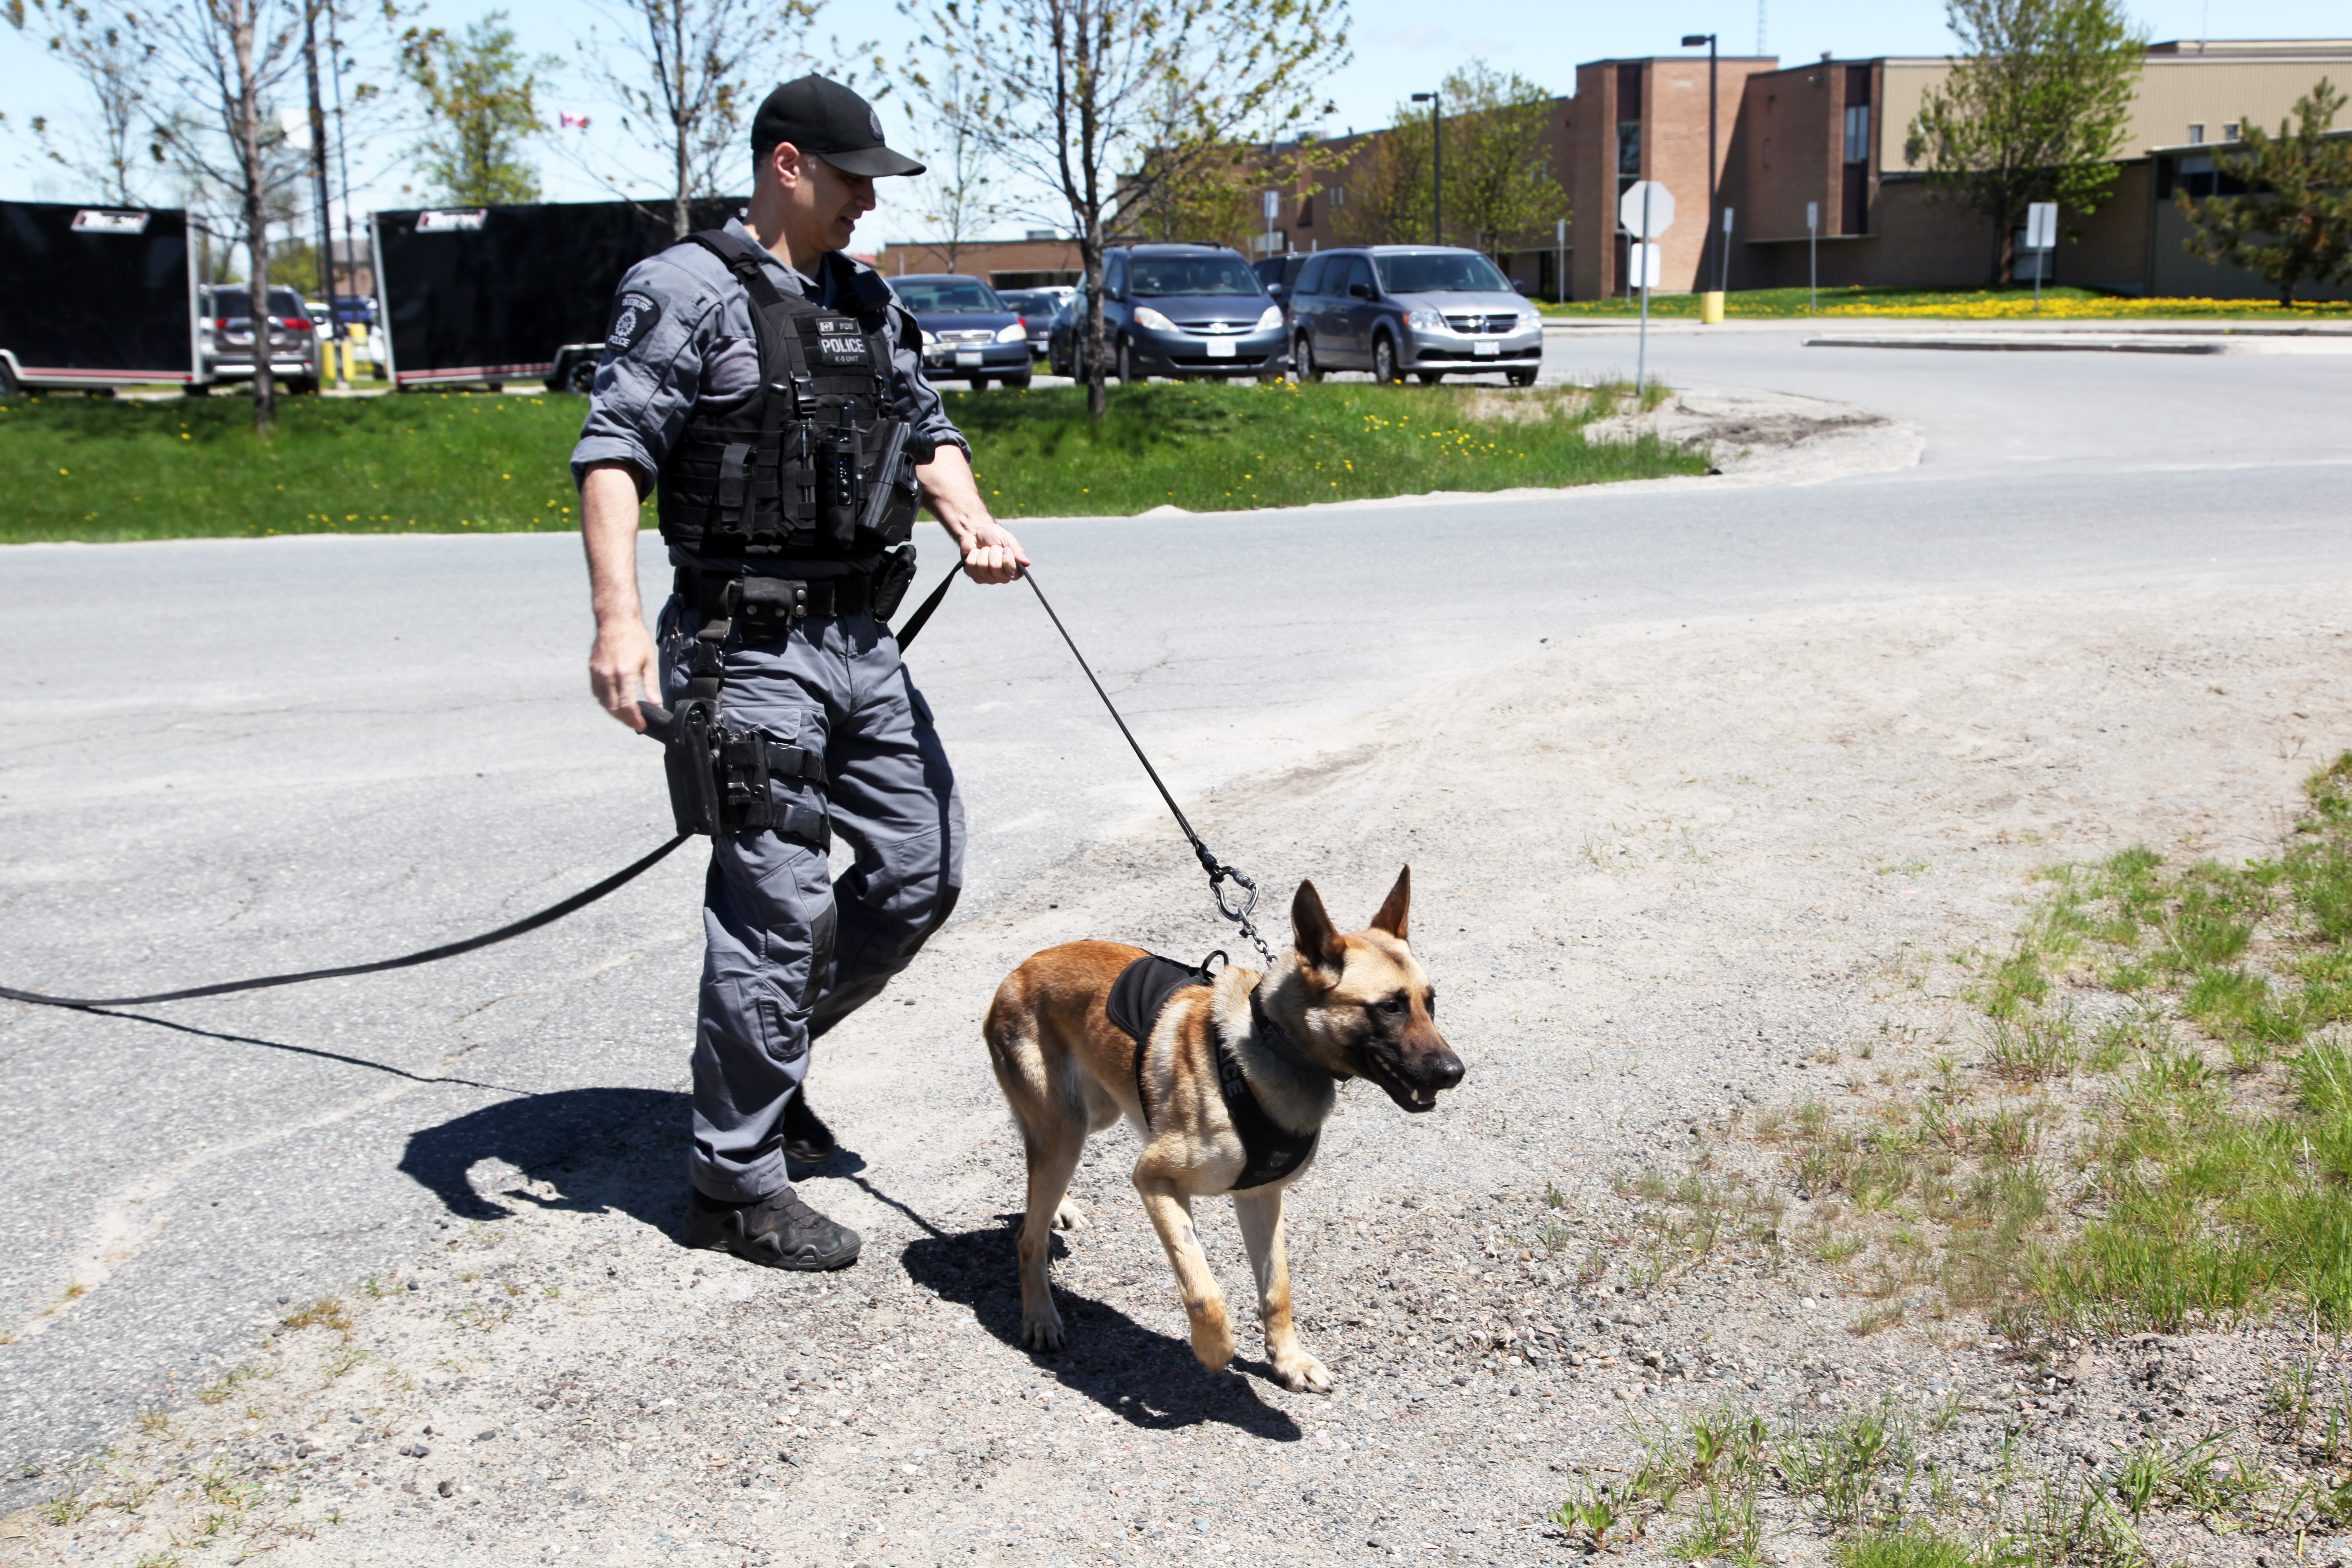 Officer walking police dog outdoors on leash